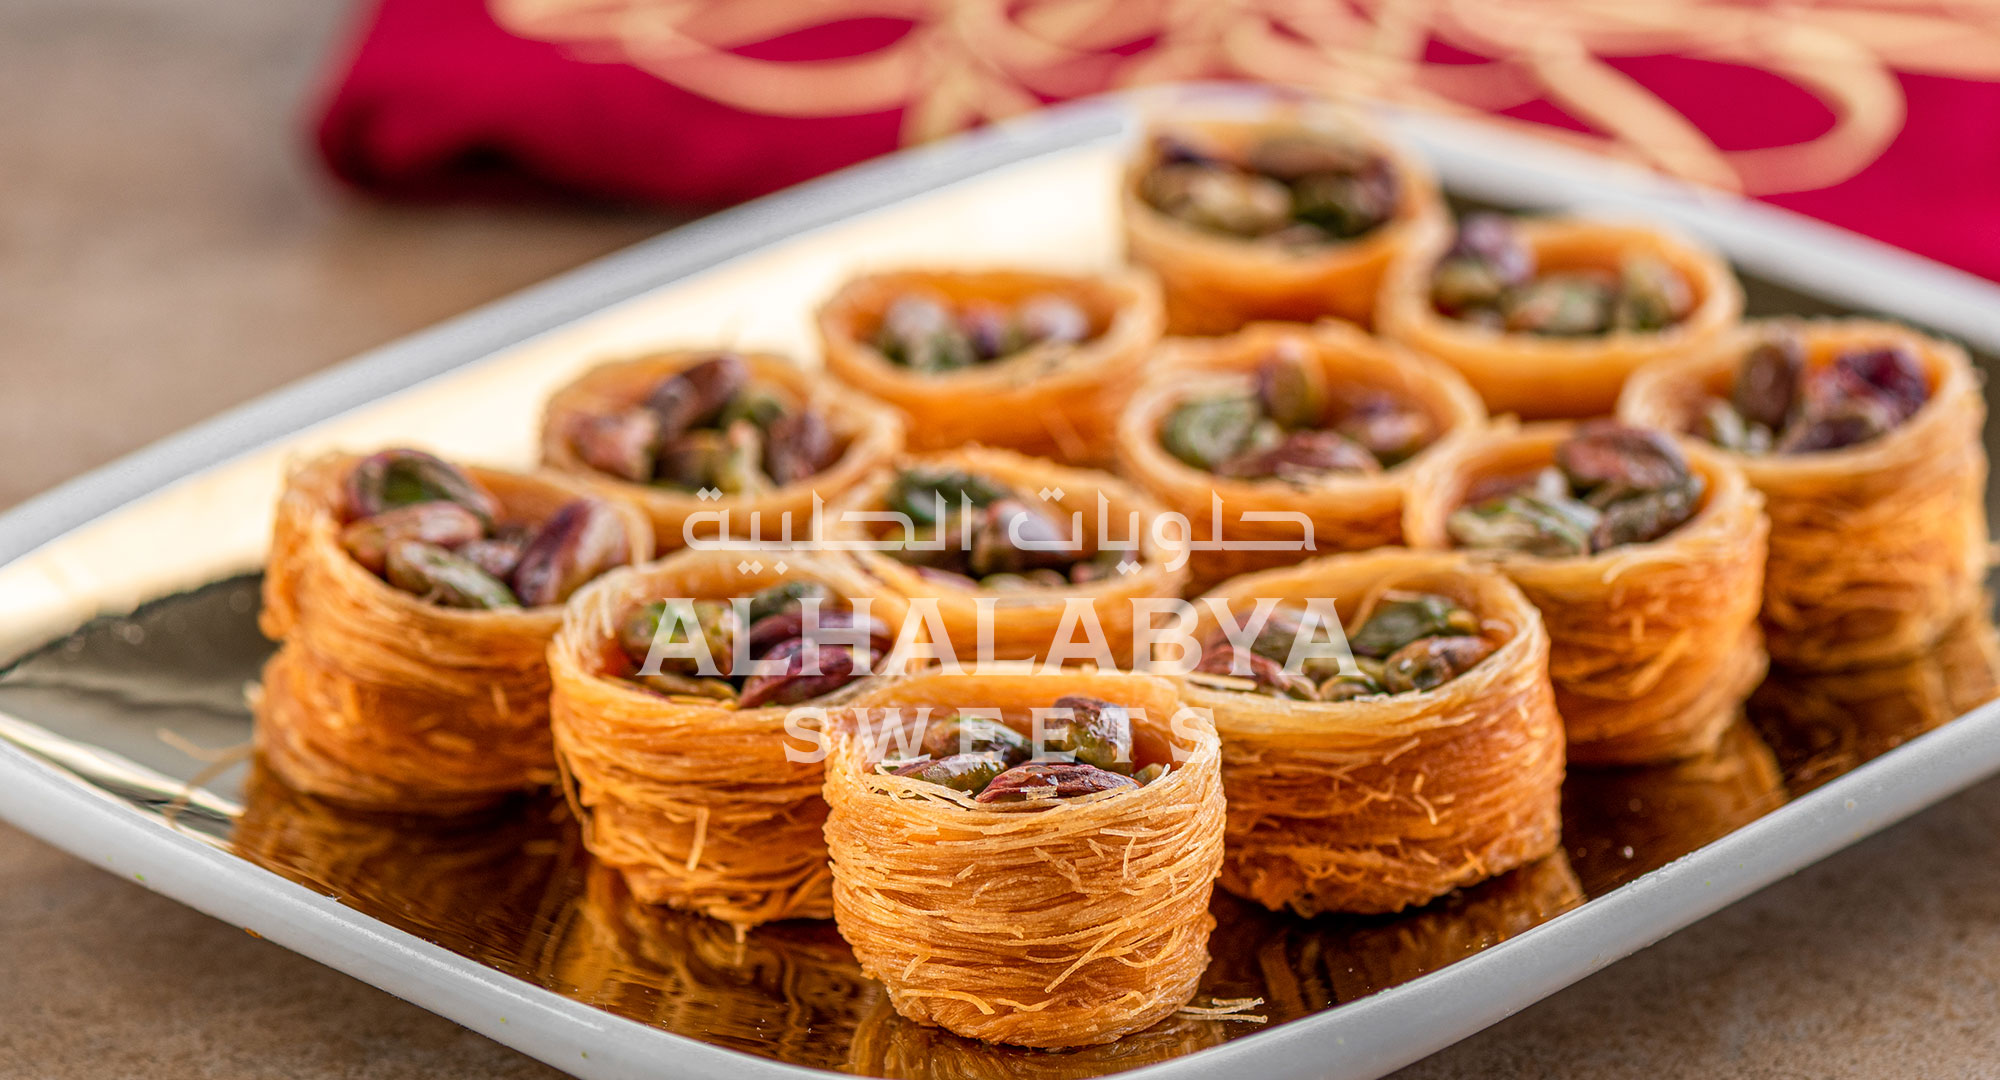 Why Choose Al Halabya Sweets for Baklava in the UAE